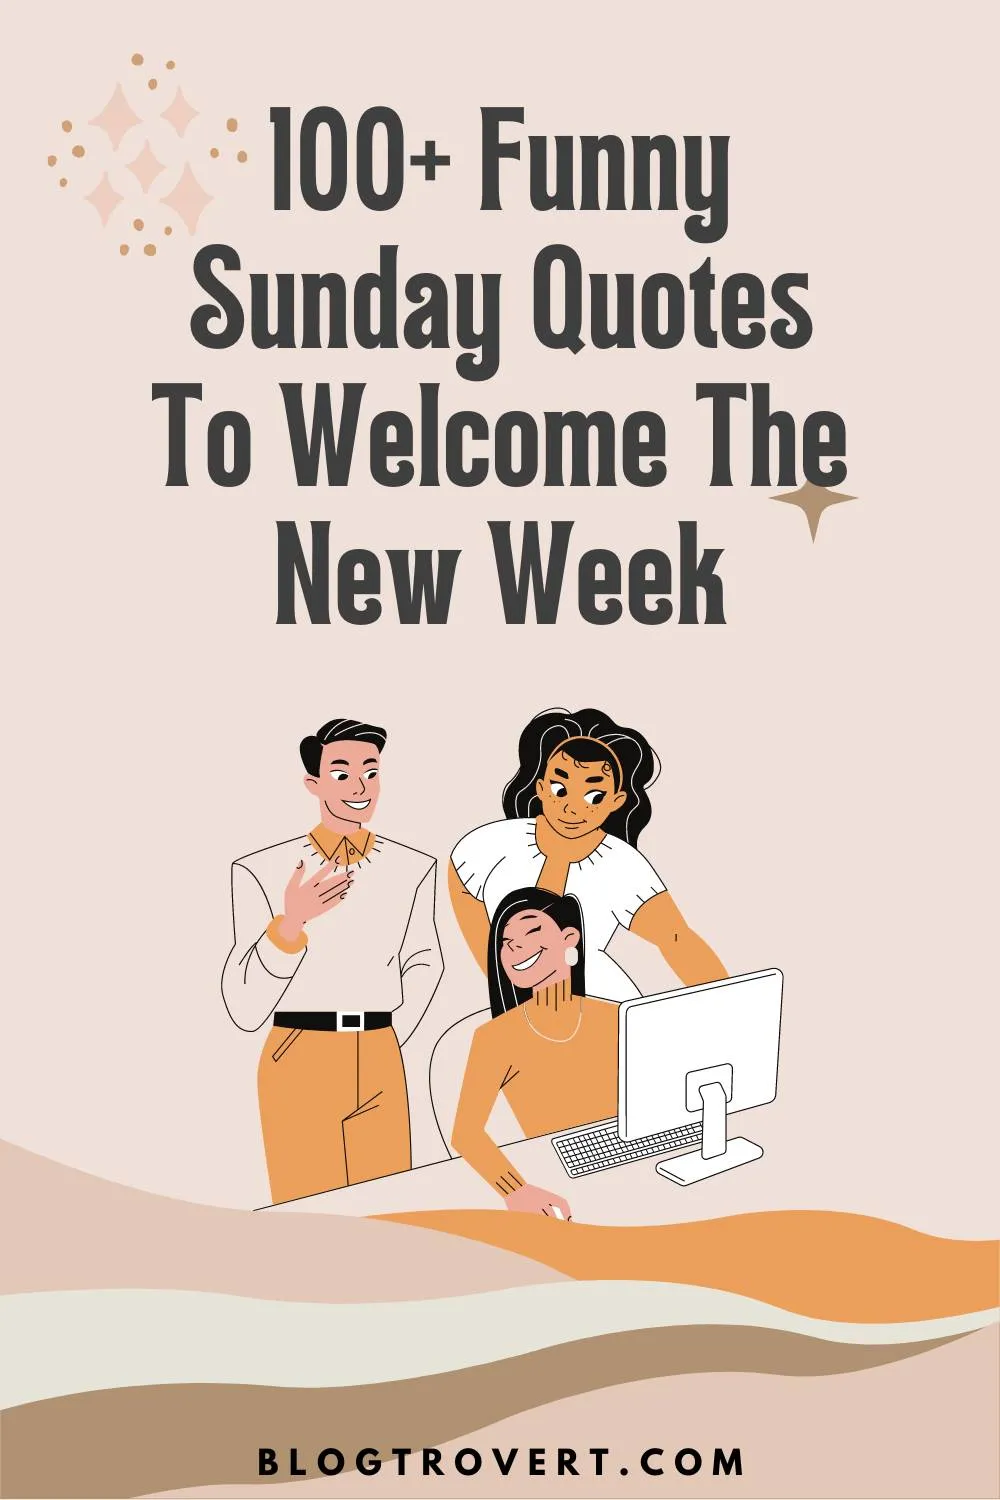 108 funny Sunday quotes to welcome the new week 10